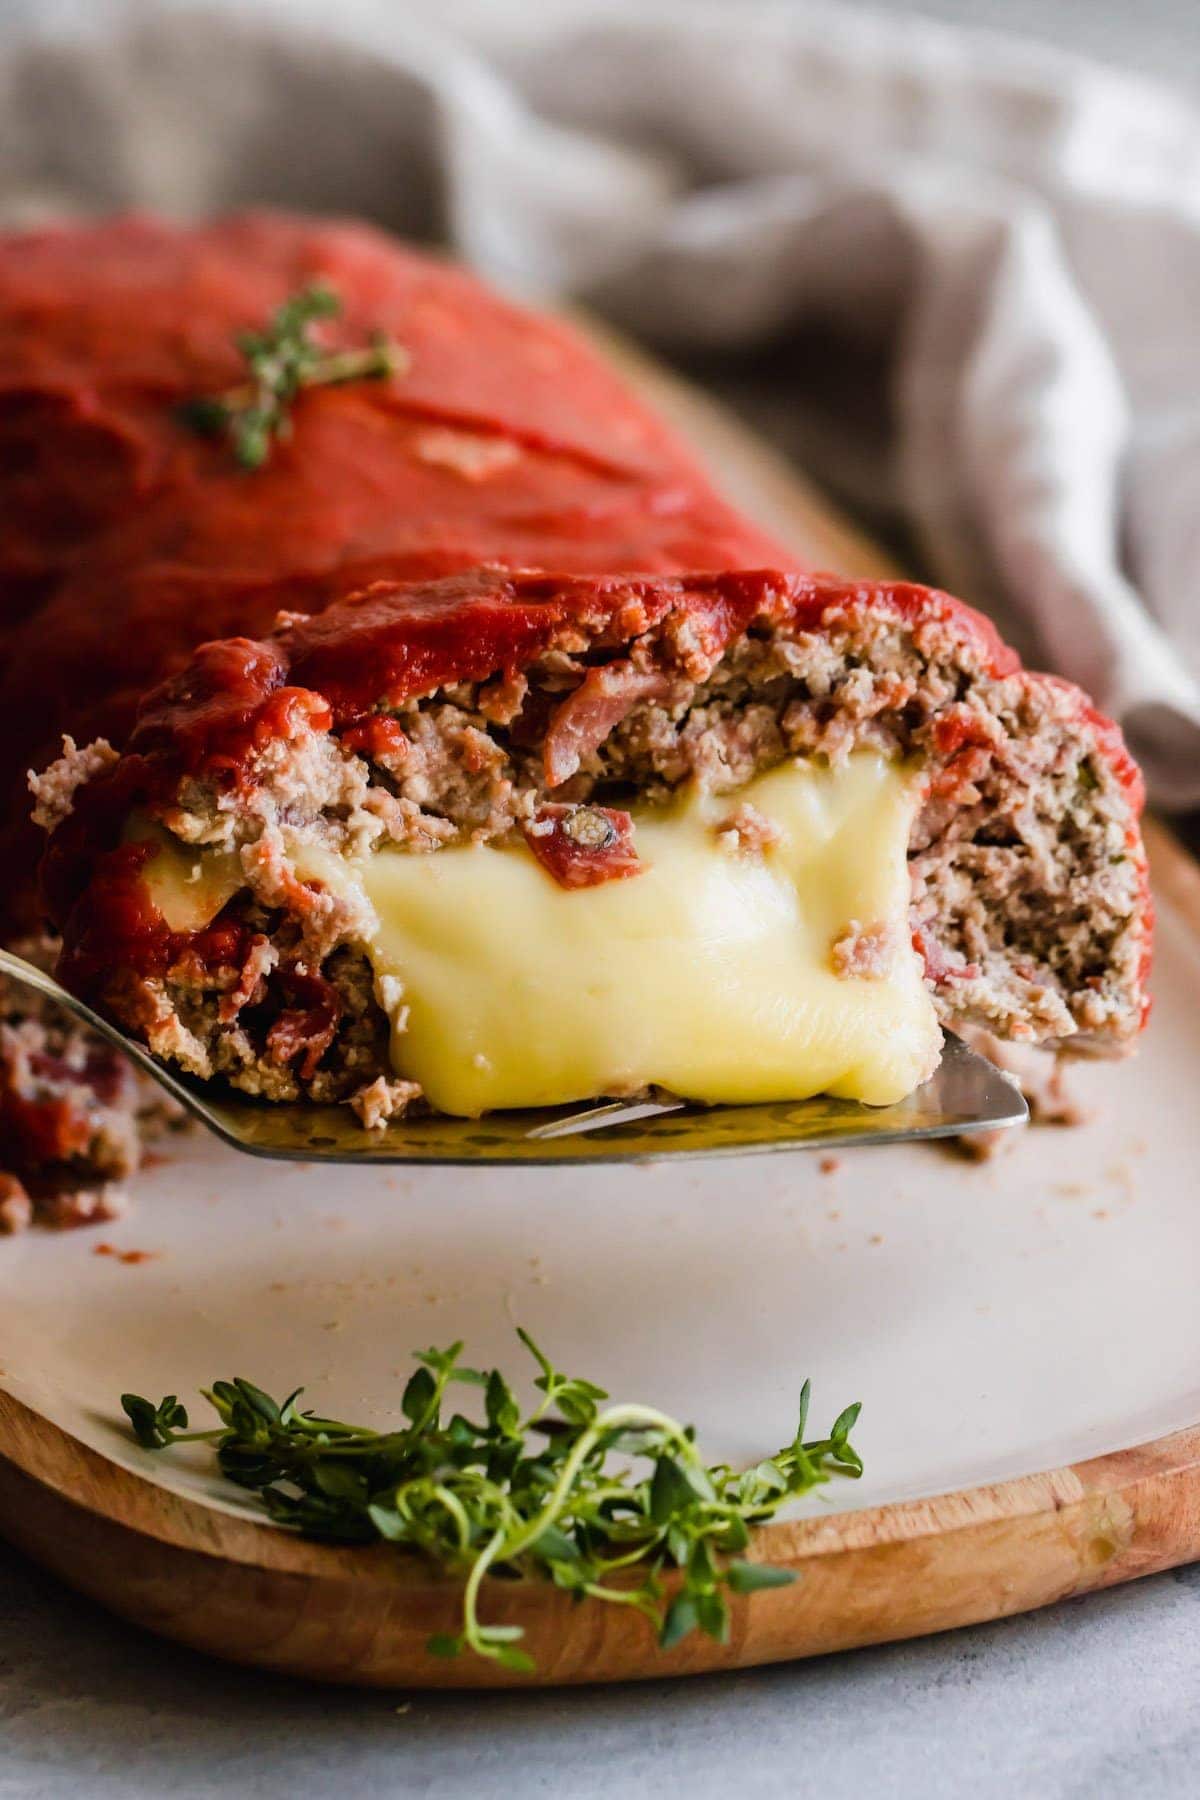 Pizza stuffed meatloaf with mozzarella cheese.